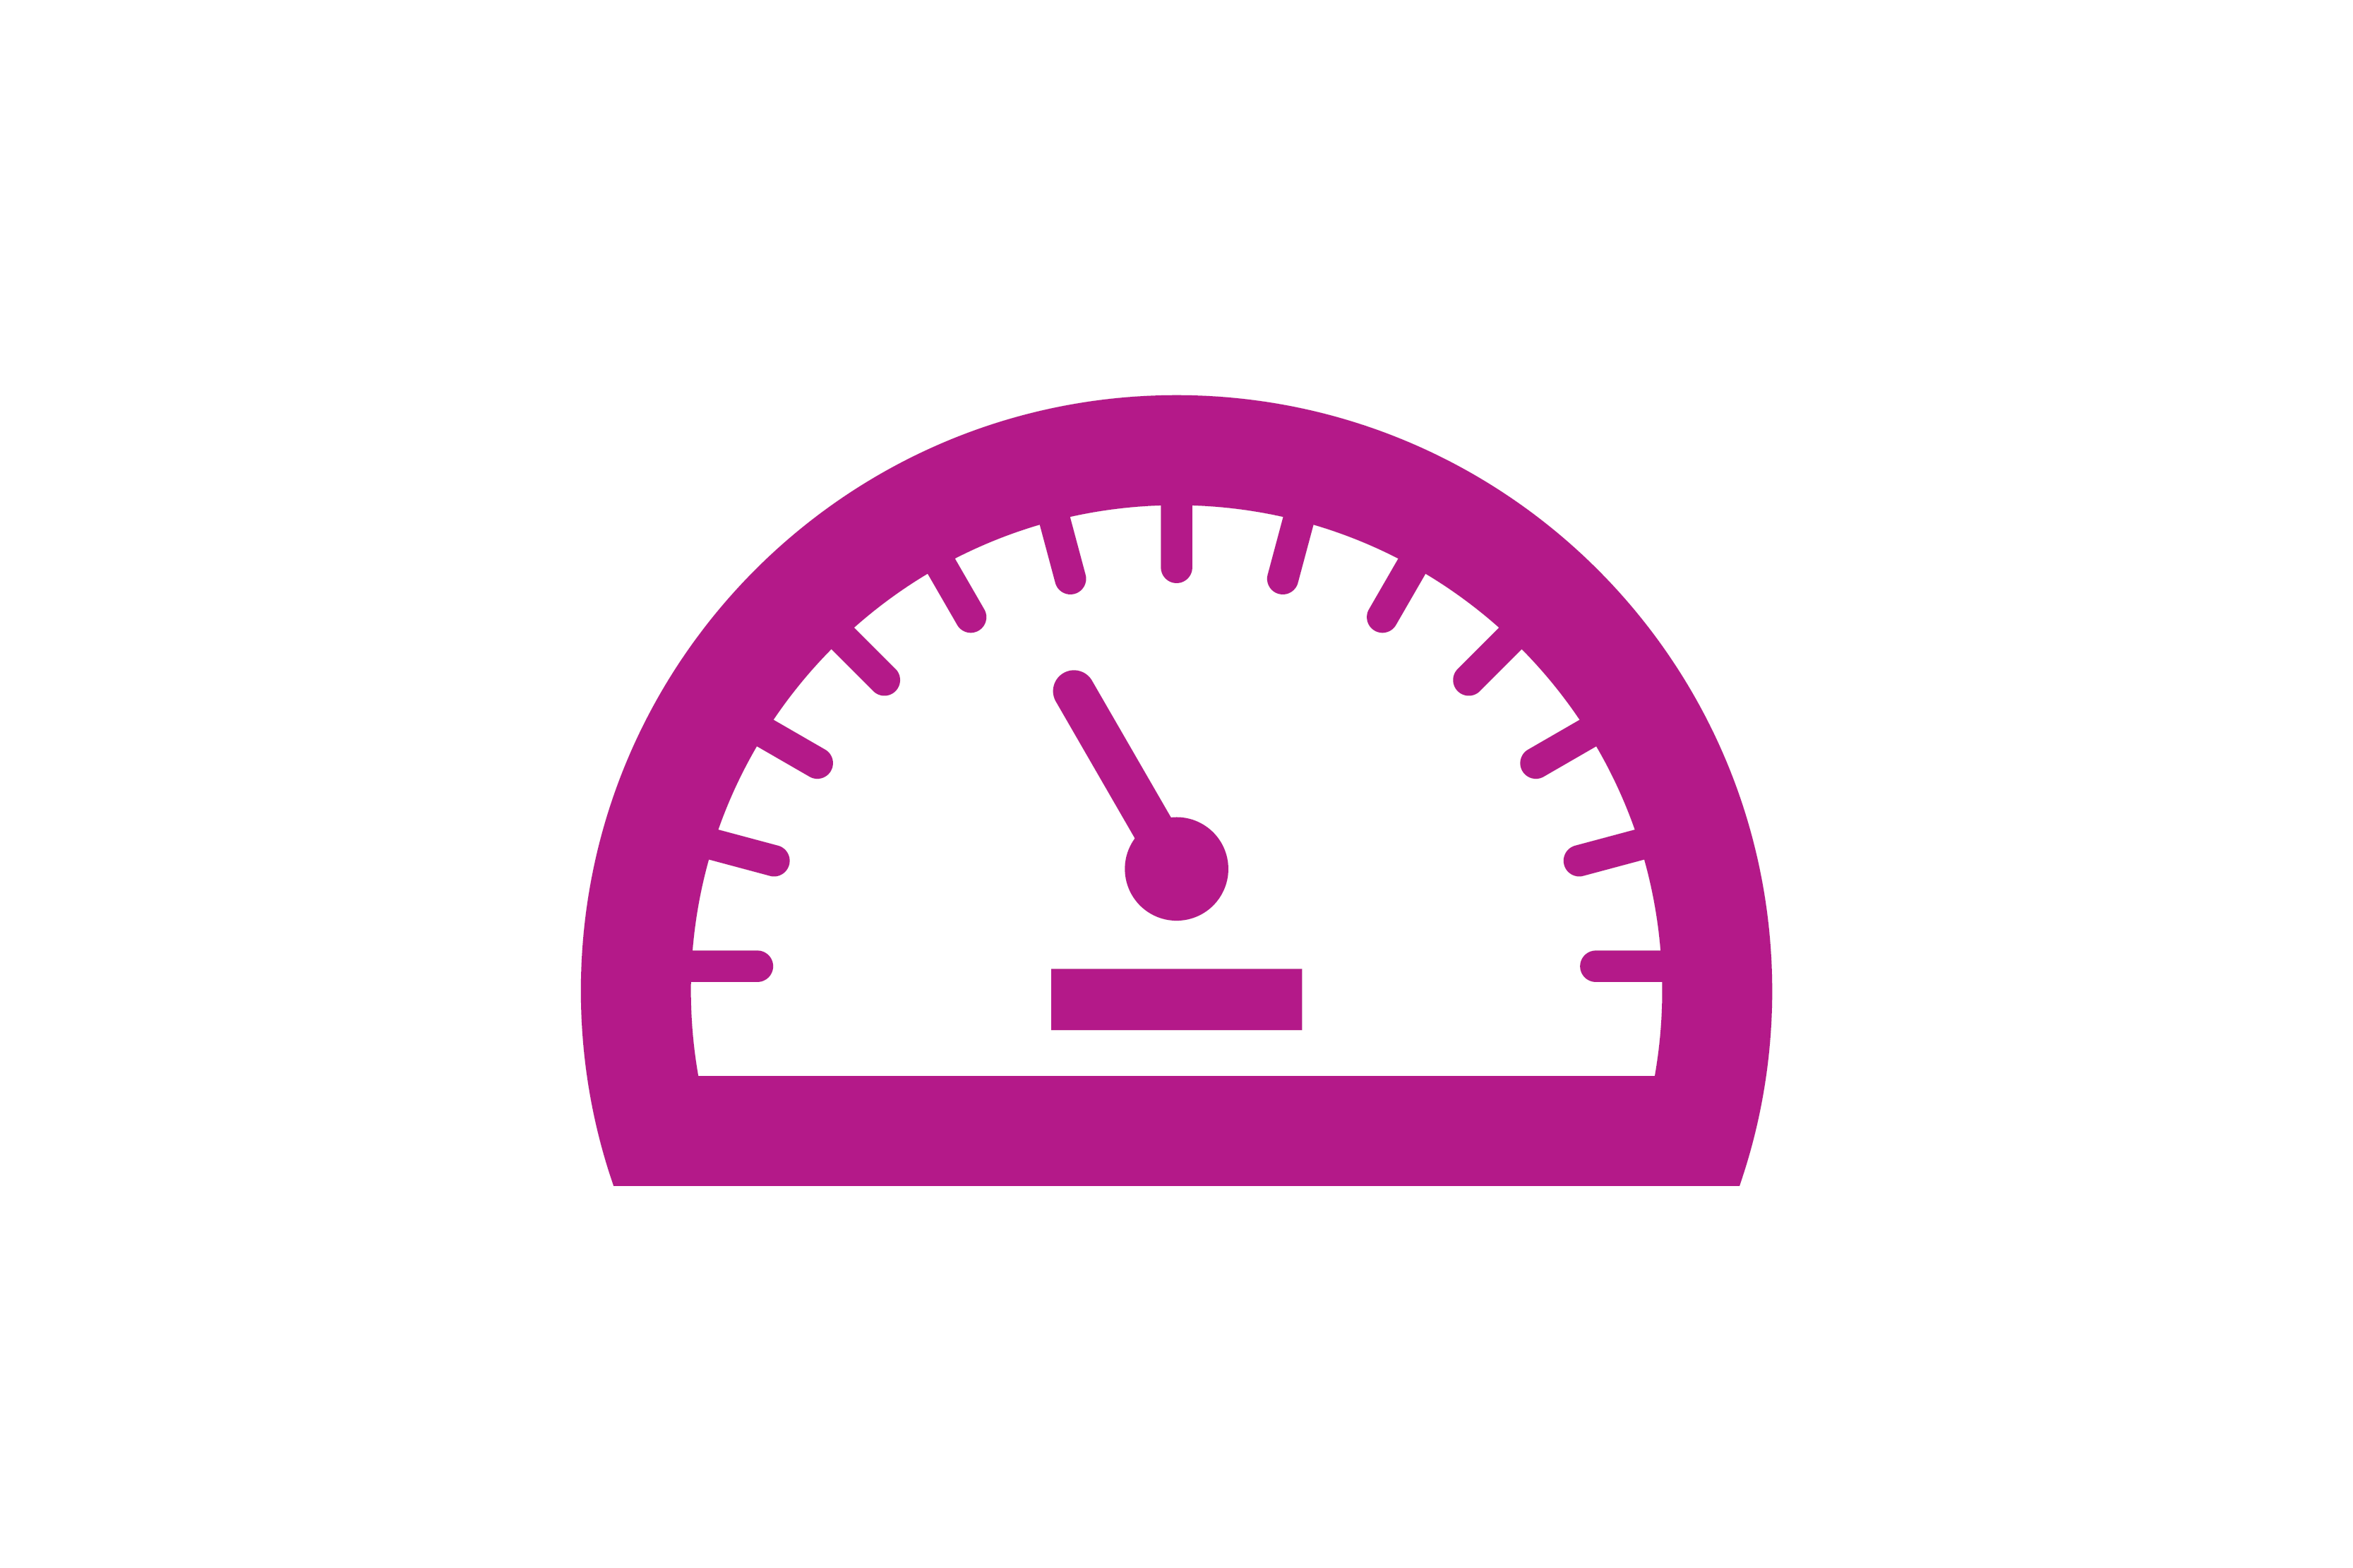 An icon of a speedometer on a vehicle dashboard.